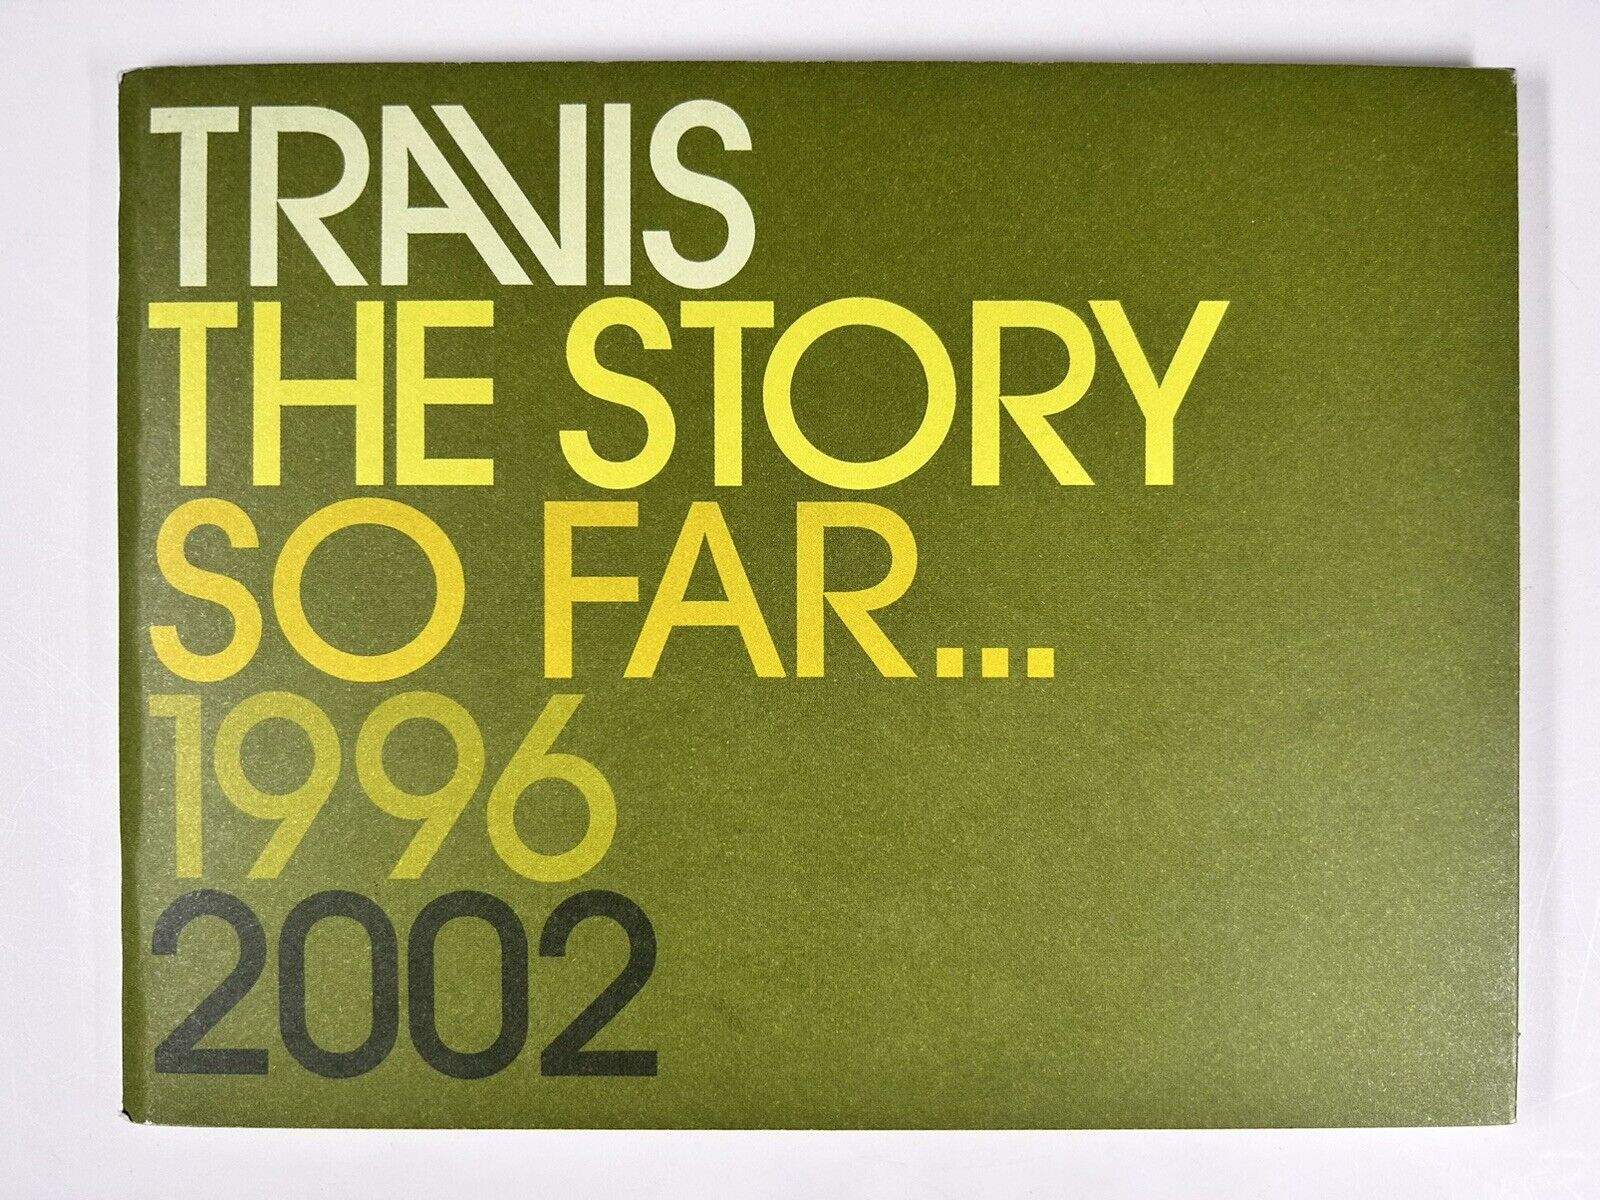 Travis Fran Healy Dougie Payne Andy Dunlop Book Orig The Story So Far 1996-2002